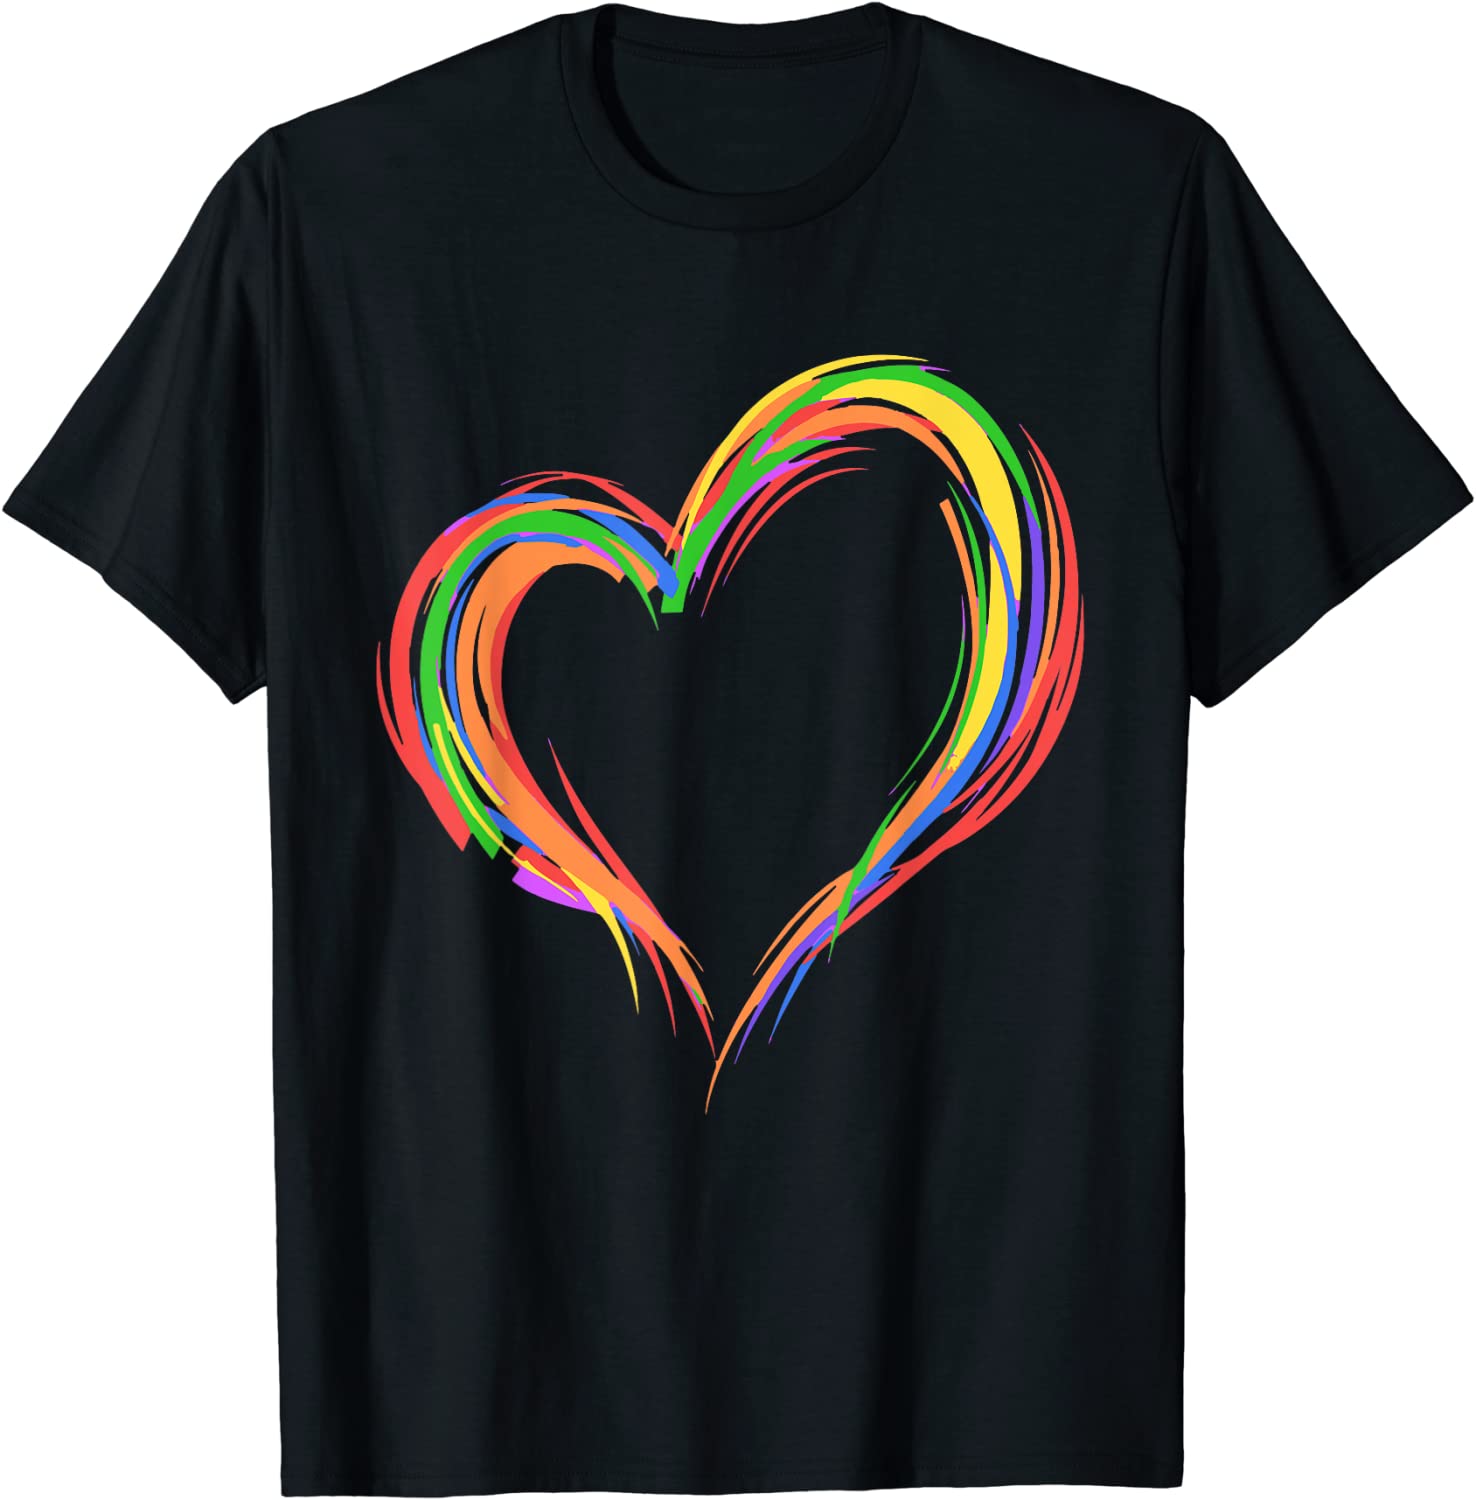 Spread Love and Pride with this Heart Rainbow Flag LGBT Support T-Shirt ...